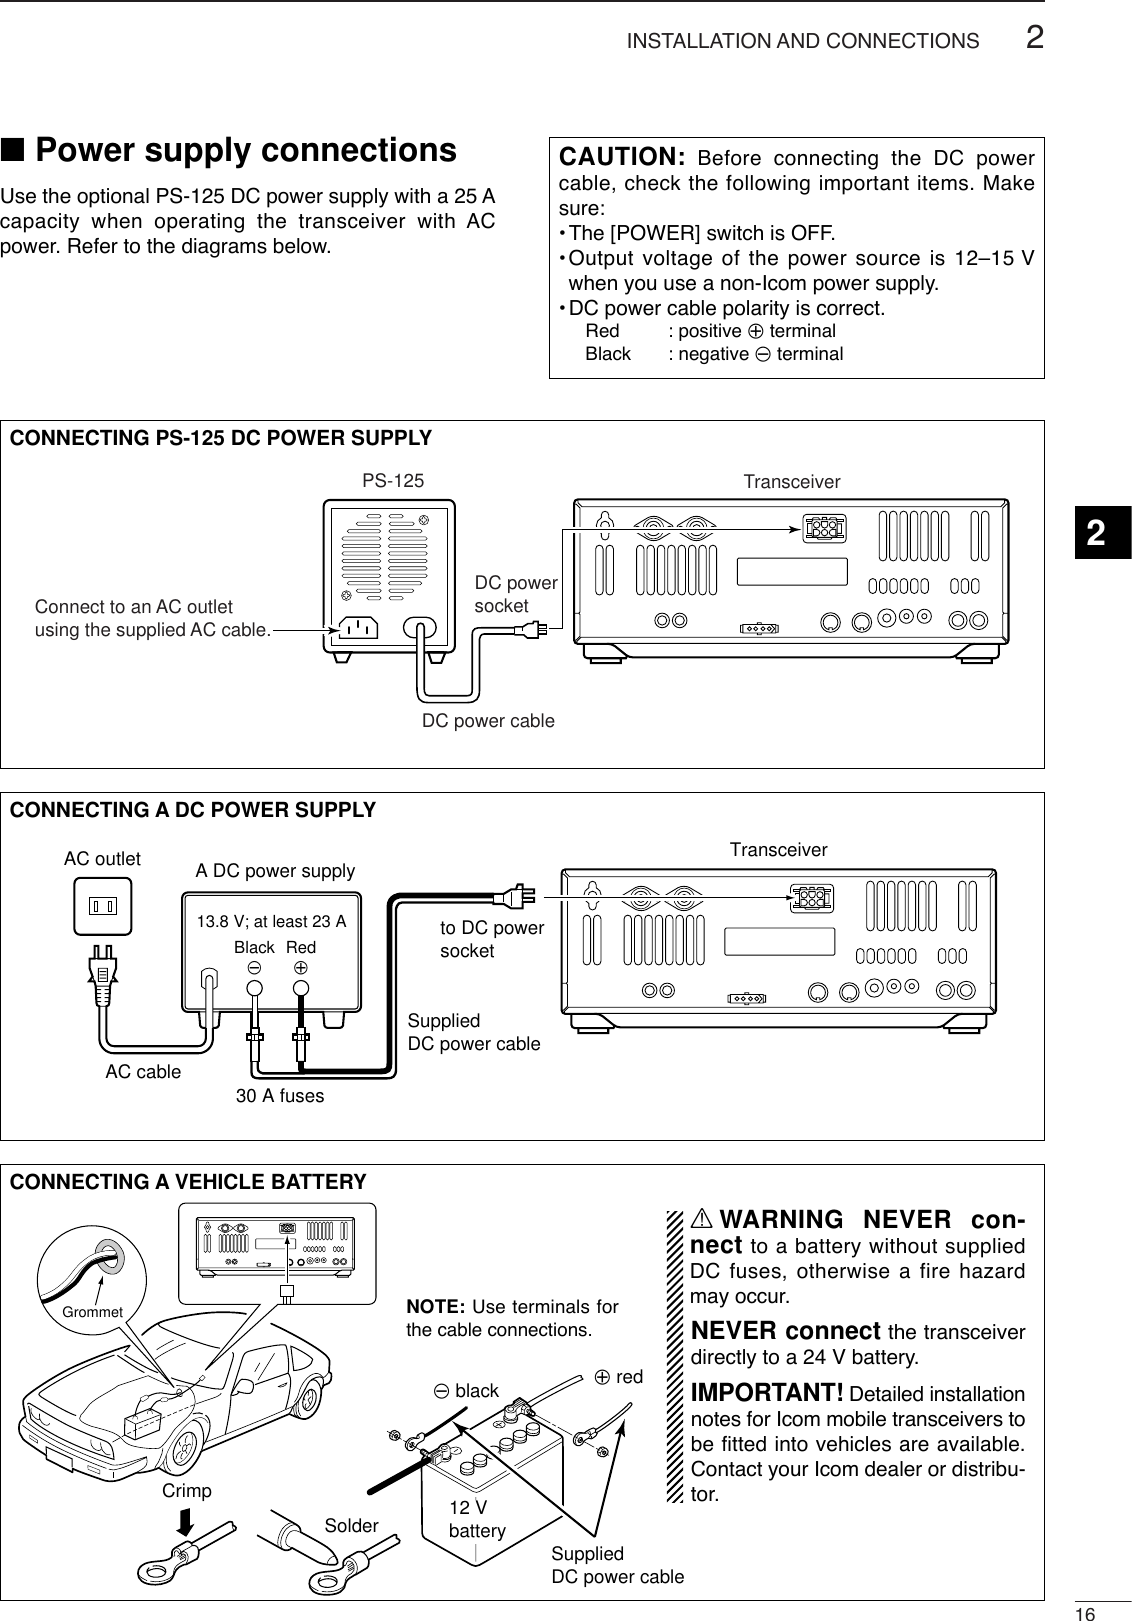 162INSTALLATION AND CONNECTIONS2■Power supply connectionsUse the optional PS-125 DC power supply with a 25 Acapacity when operating the transceiver with ACpower. Refer to the diagrams below.CAUTION: Before connecting the DC powercable, check the following important items. Makesure:•The [POWER] switch is OFF.•Output voltage of the power source is 12–15 Vwhen you use a non-Icom power supply.•DC power cable polarity is correct.Red : positive +terminalBlack : negative _terminalCONNECTING A DC POWER SUPPLYto DC power socketA DC power supplyAC outletAC cable30 A fusesSuppliedDC power cable13.8 V; at least 23 ABlack_Red+TransceiverCONNECTING A VEHICLE BATTERY12 VbatterySuppliedDC power cable+ red_ blackCrimpSolderGrommetNOTE: Use terminals forthe cable connections.RWARNING NEVER con-nect to a battery without suppliedDC fuses, otherwise a fire hazardmay occur.NEVER connect the transceiverdirectly to a 24 V battery.IMPORTANT! Detailed installationnotes for Icom mobile transceivers tobe fitted into vehicles are available.Contact your Icom dealer or distribu-tor.CONNECTING PS-125 DC POWER SUPPLYPS-125Connect to an AC outletusing the supplied AC cable.DC power cableDC powersocketTransceiver